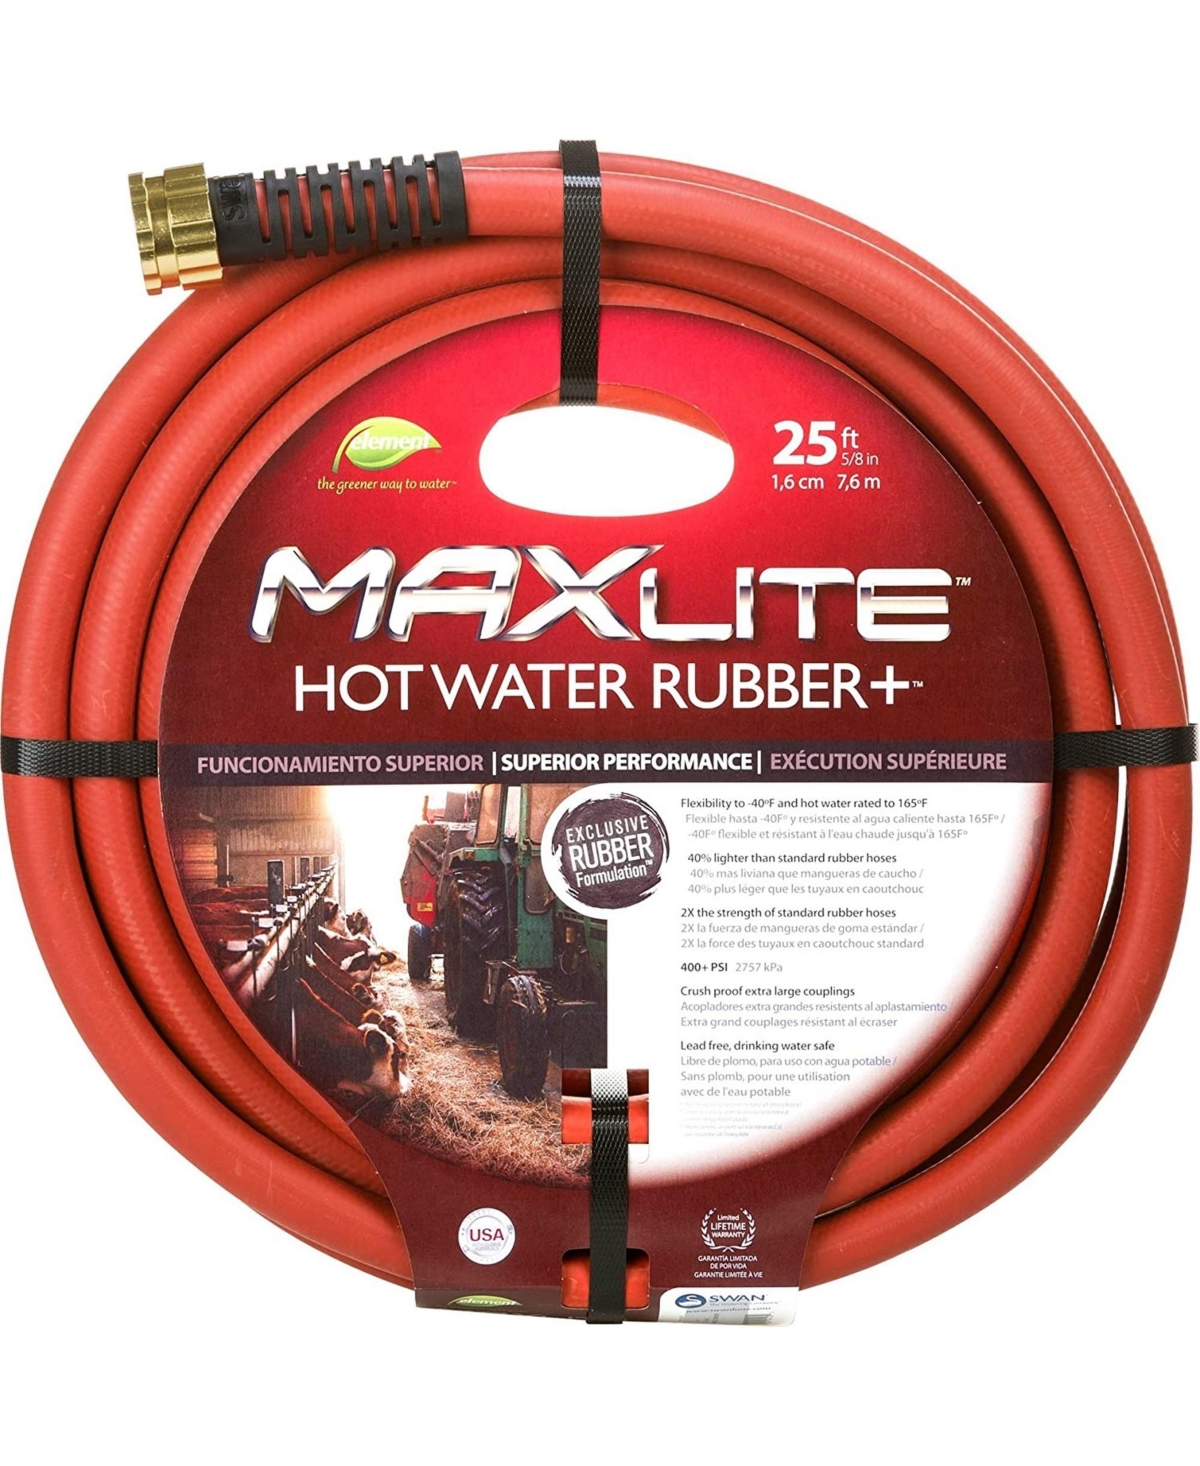 Swan Watering Co. Element MAXLite Hot Water Rubber Hose 5 8" x 25' Red - Red